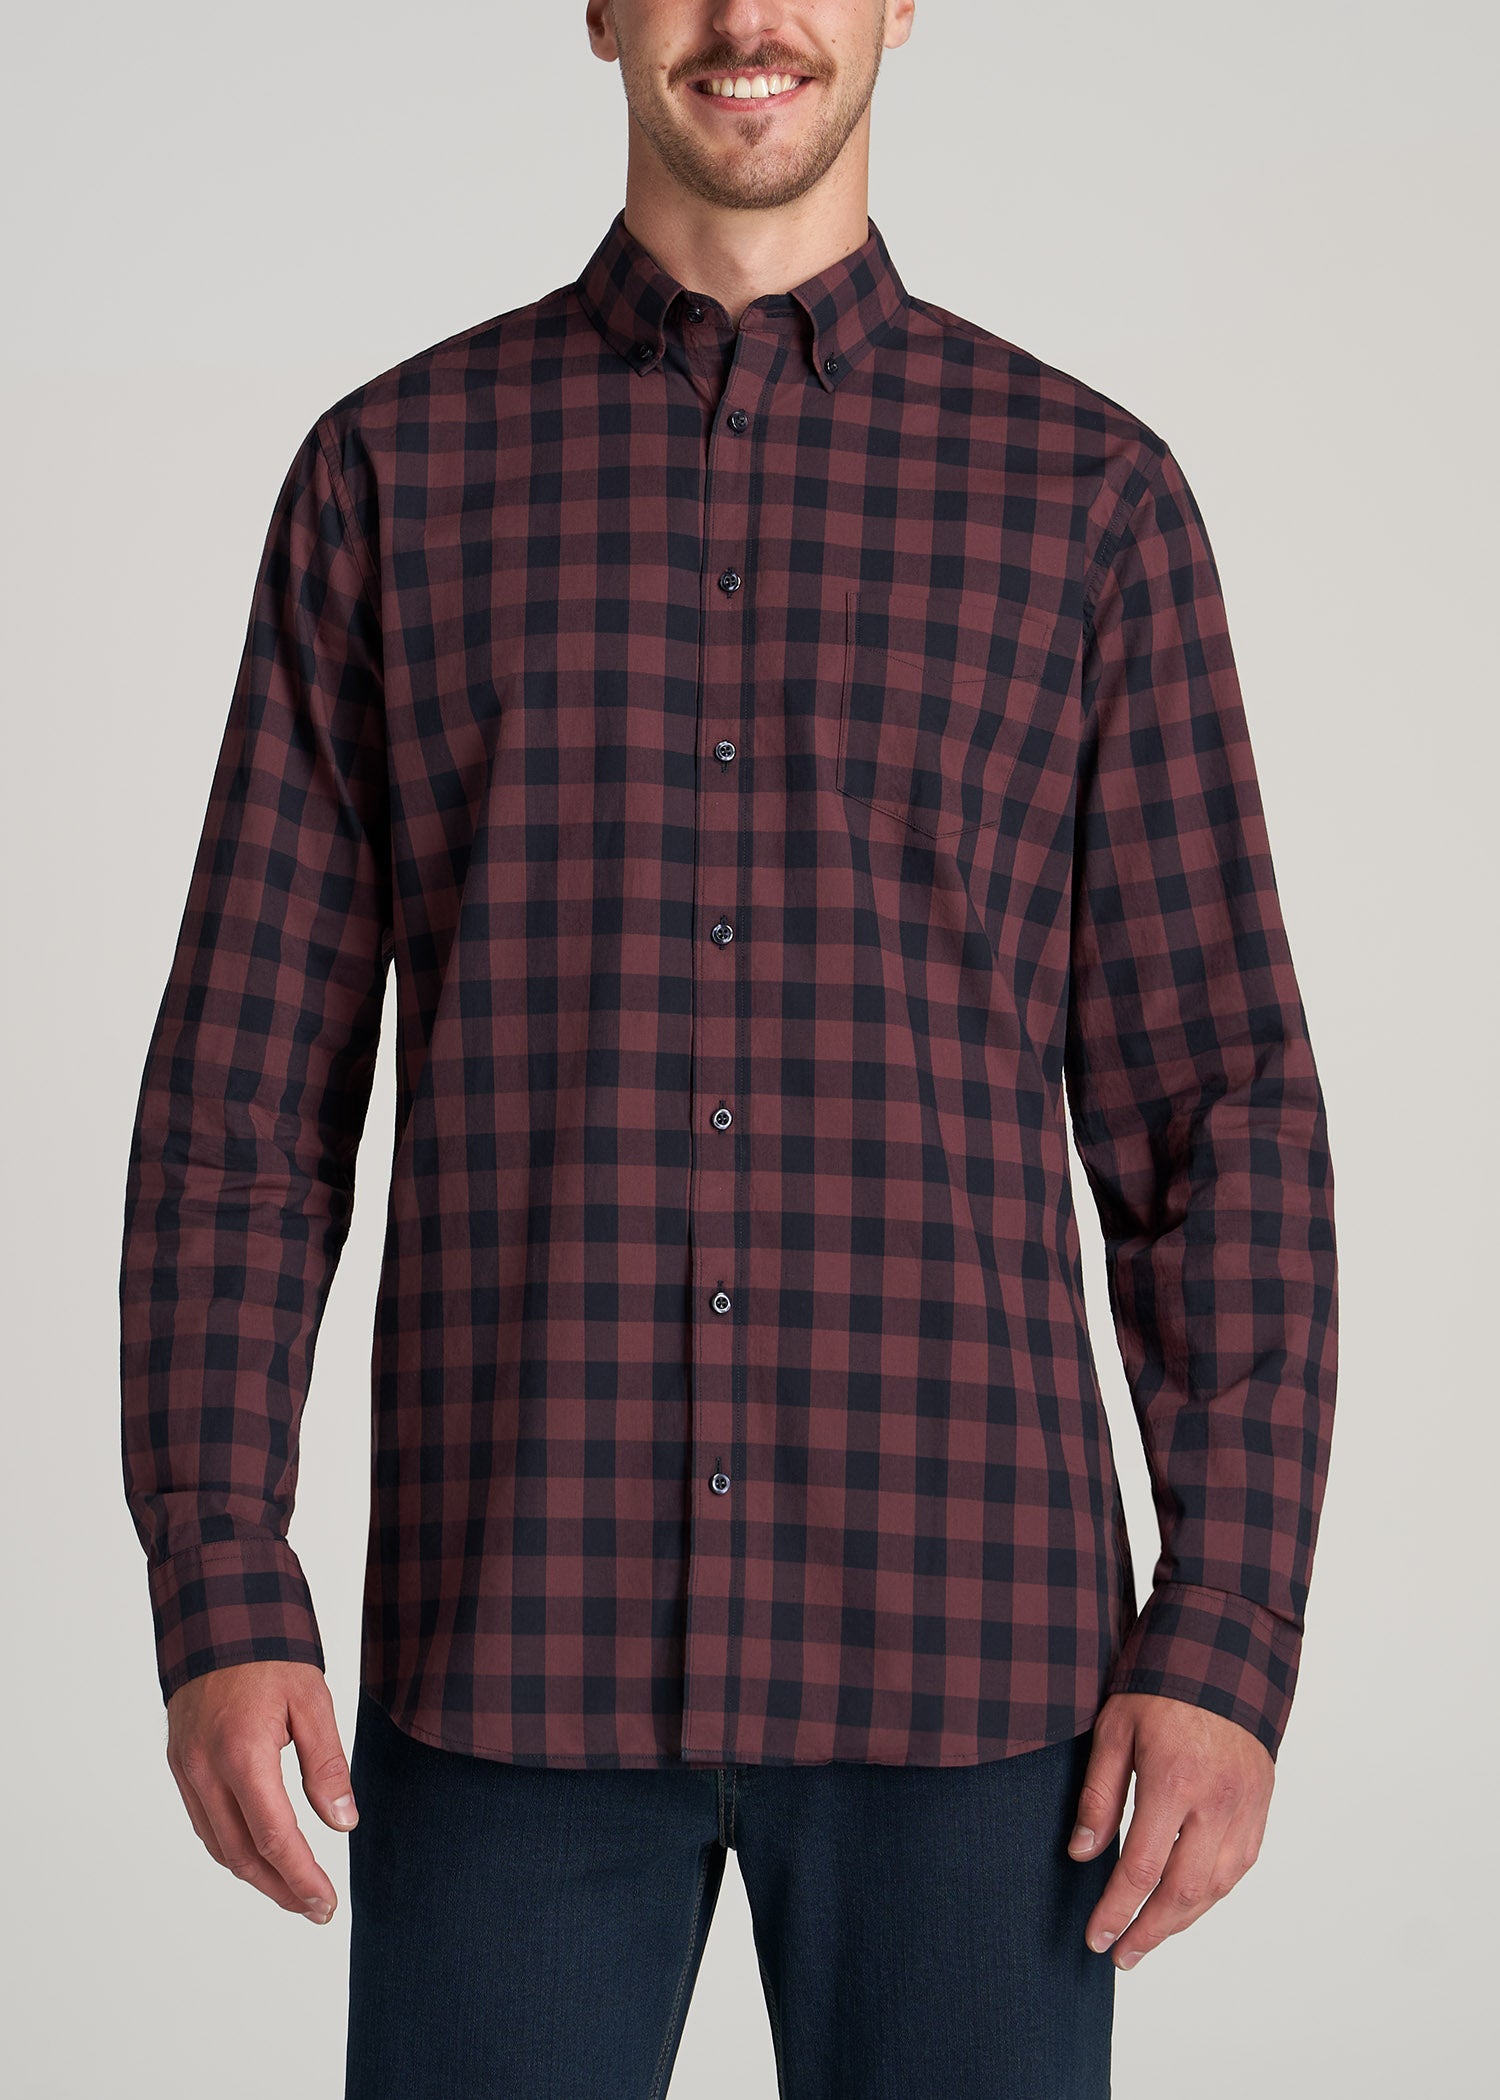    American-Tall-Men-Soft-Wash-Navy-Maroon-Check-front